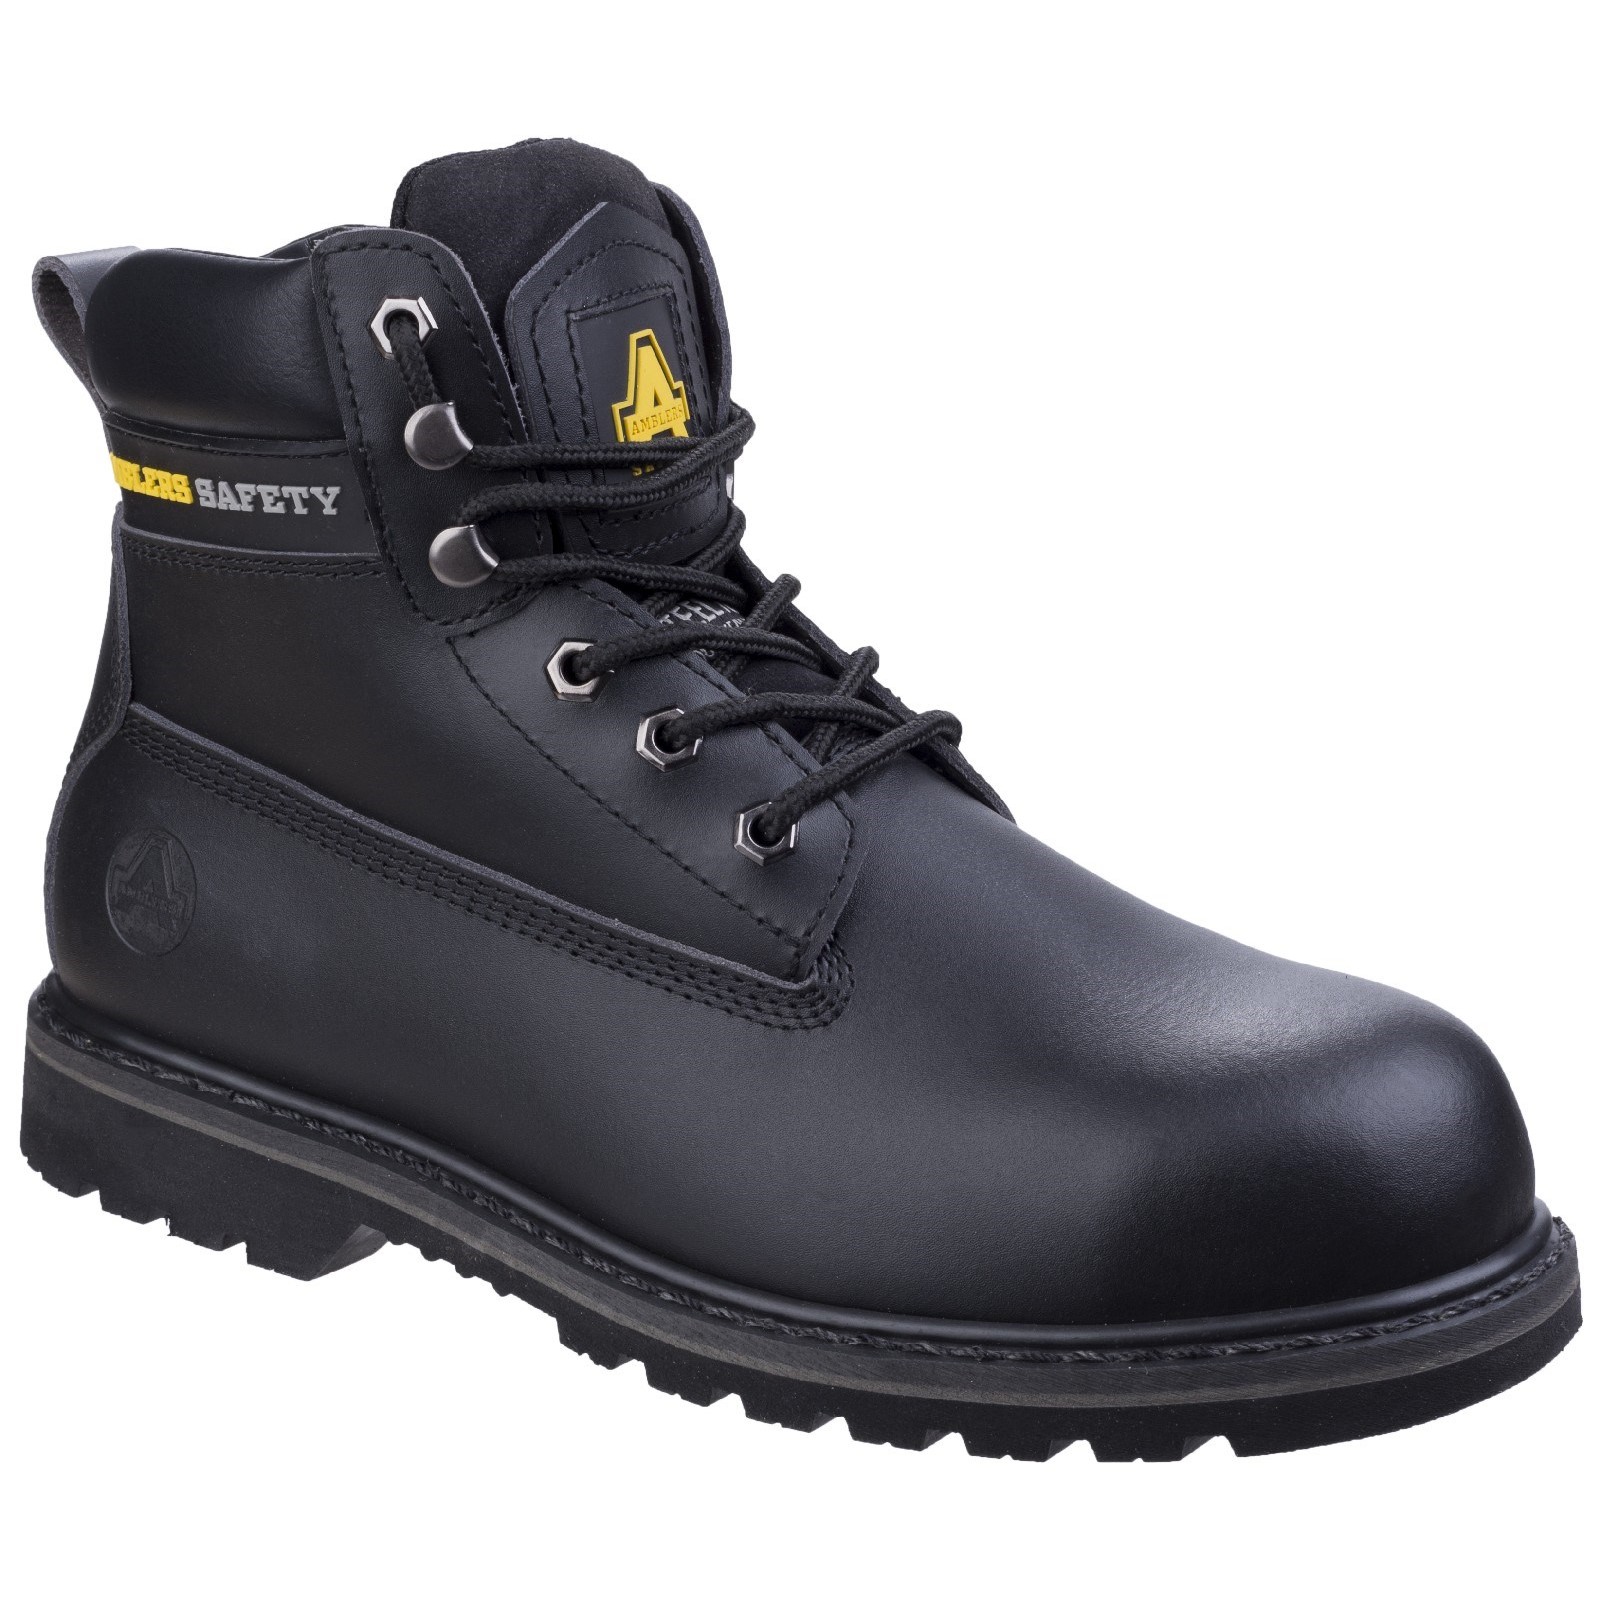 Amblers Safety Welted Boots